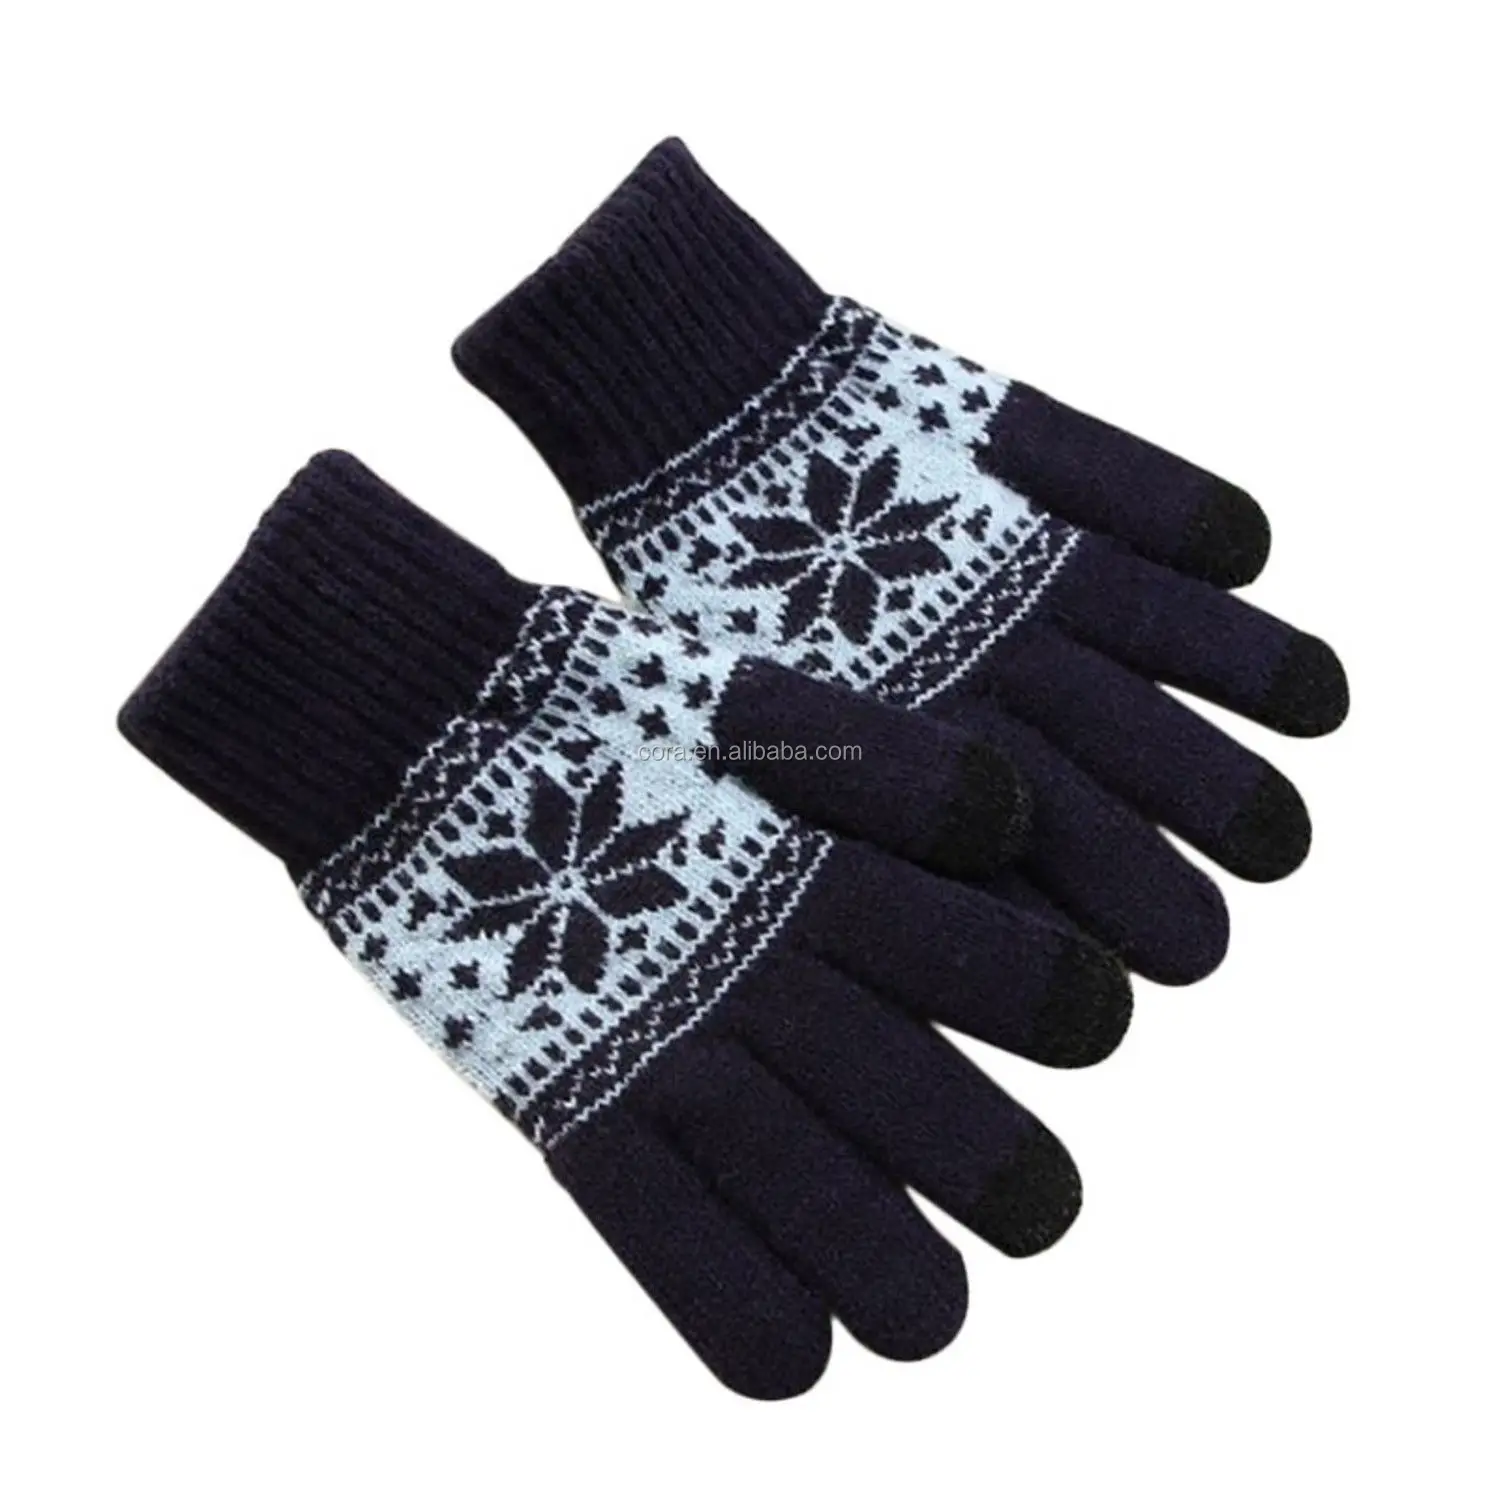 Boys Girls Magic Stretchy Gloves Snowflake Colorful NEW Childrens Kids 